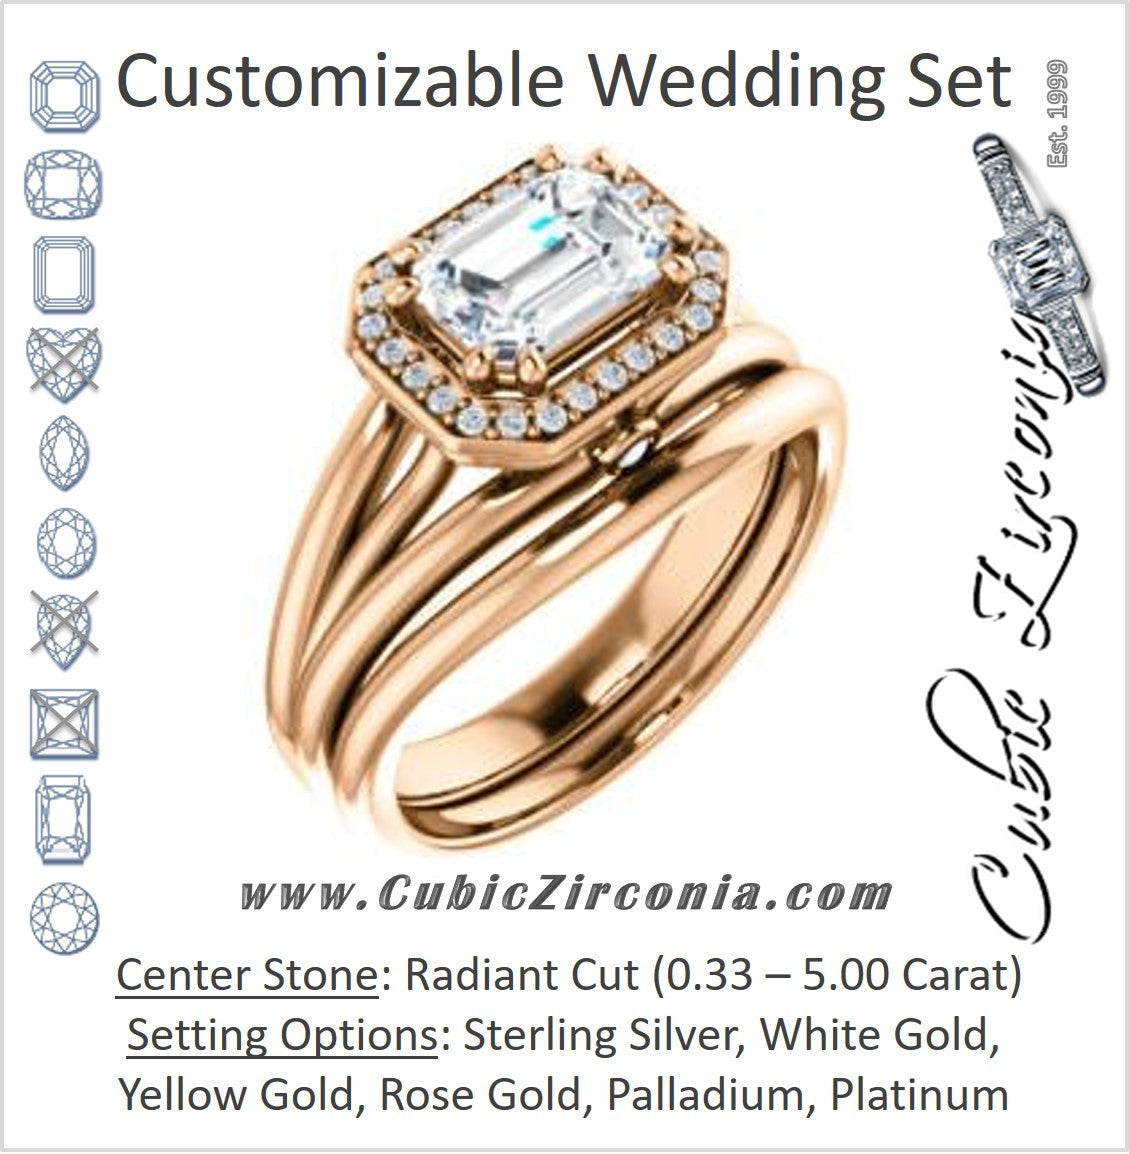 CZ Wedding Set, featuring The Wanda Lea engagement ring (Customizable Radiant Cut Halo-style with Ultrawide Tri-split Band & Peekaboo Accents)